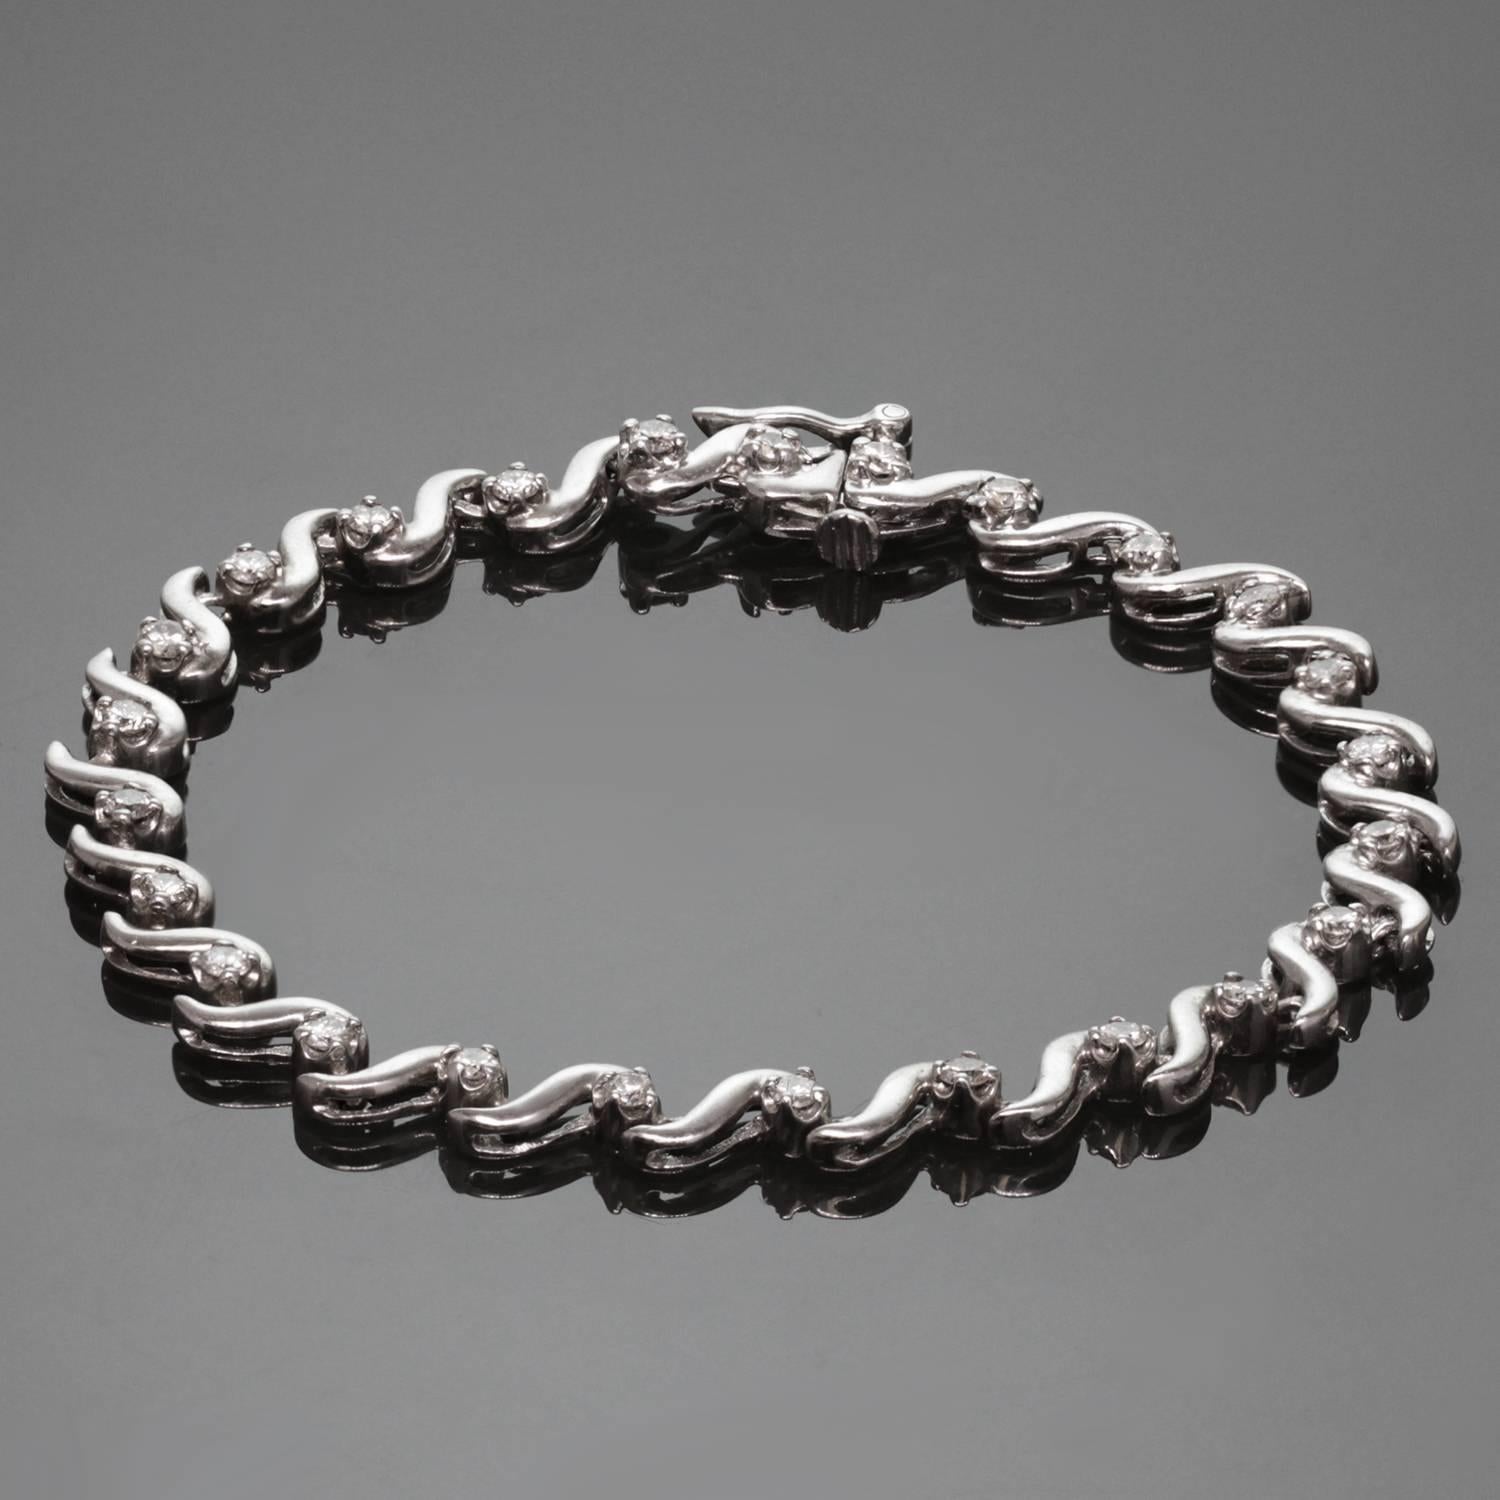 A classic modern tennis bracelet featuring 14k white gold wavy links prong-set with 24 solitaire round diamonds of an estimated 1.40 carats. A timeless design for everyday elegance. Measurements: 0.19